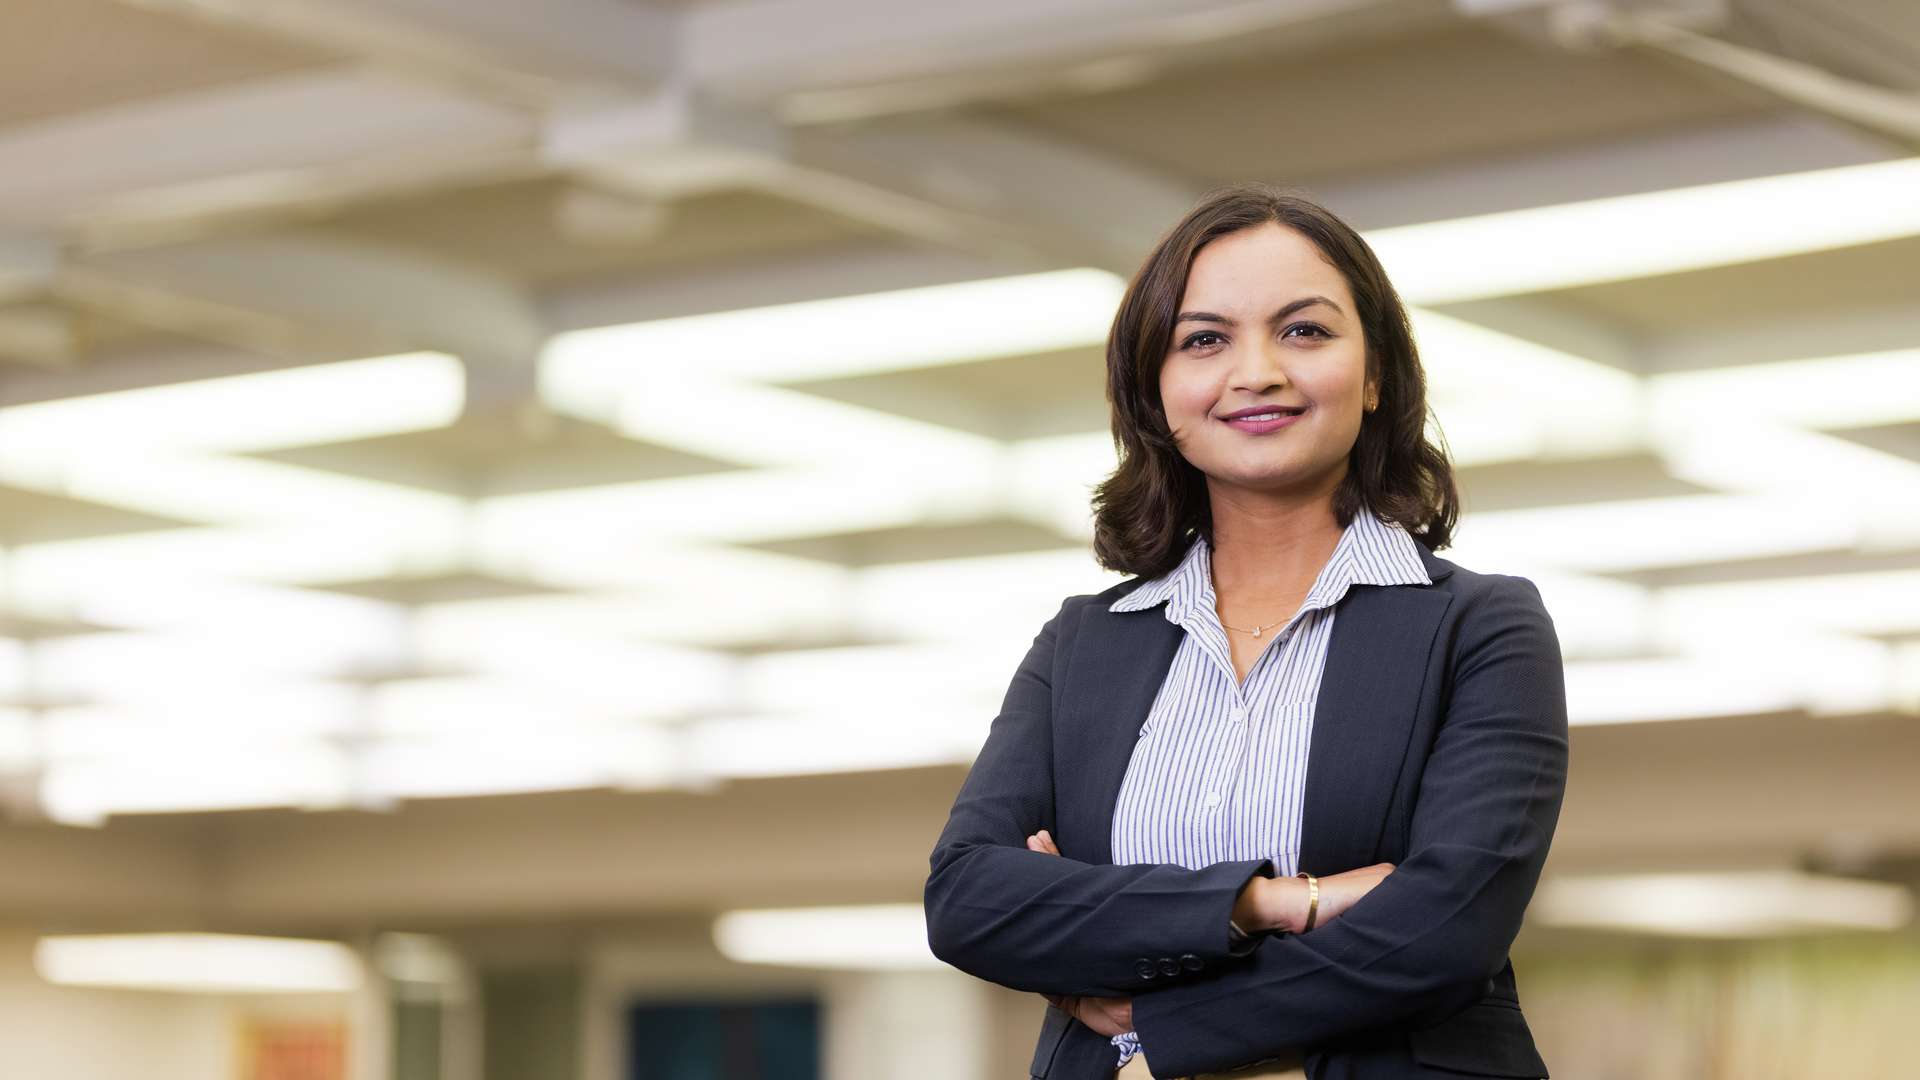 An MBA student stands in an office with crossed arms smiling confidently at the camera.